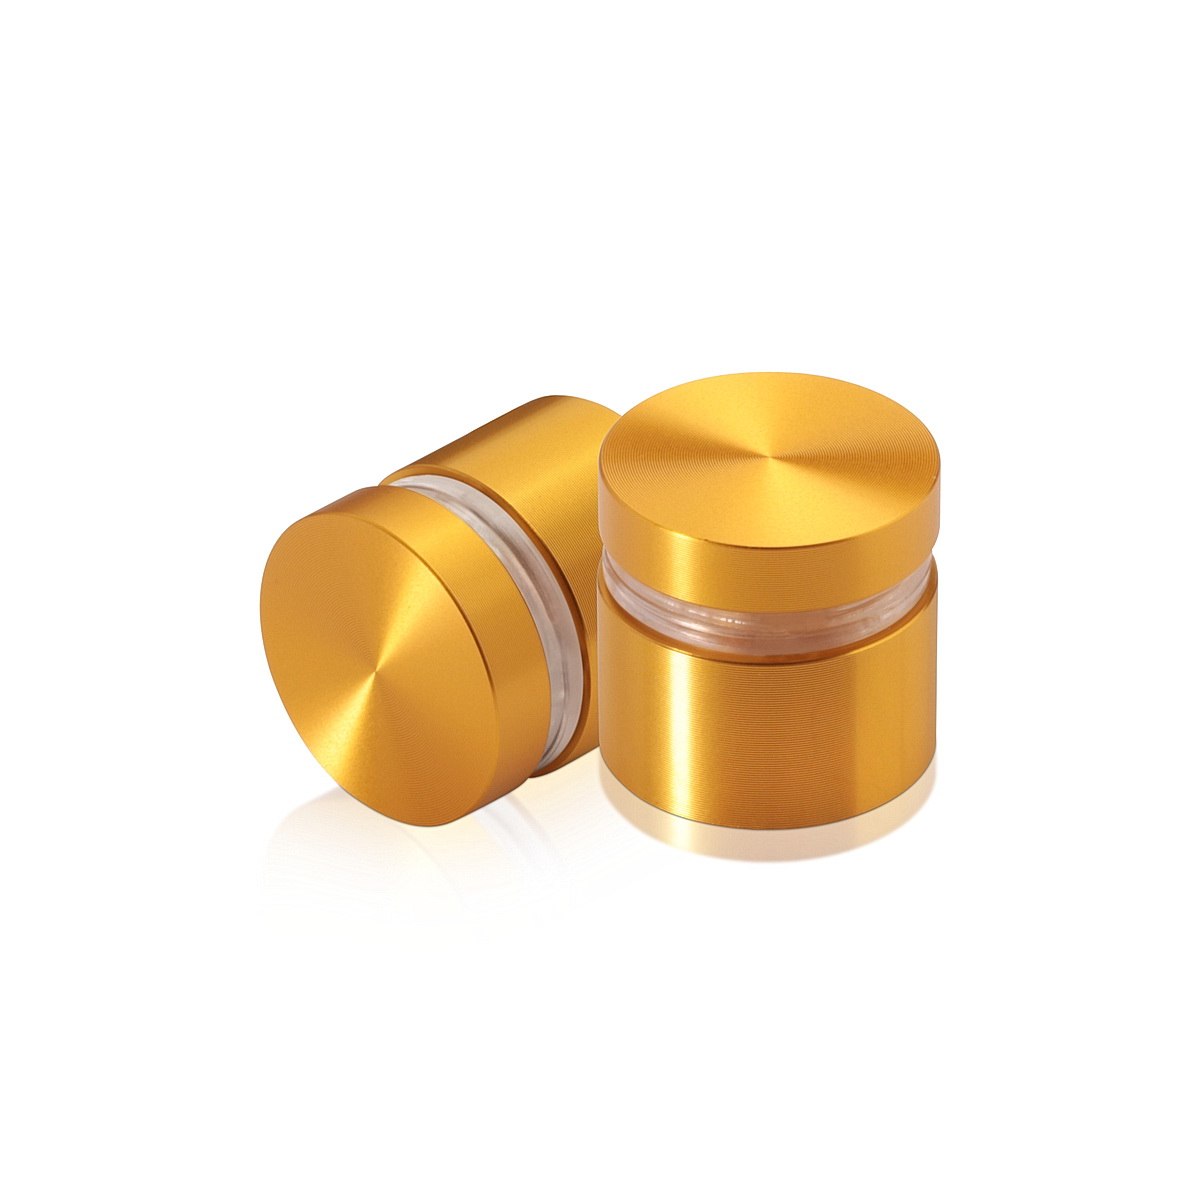 7/8'' Diameter X 1/2'' Barrel Length, Aluminum Flat Head Standoffs, Gold Anodized Finish Easy Fasten Standoff (For Inside / Outside use) Tamper Proof Standoff [Required Material Hole Size: 7/16'']